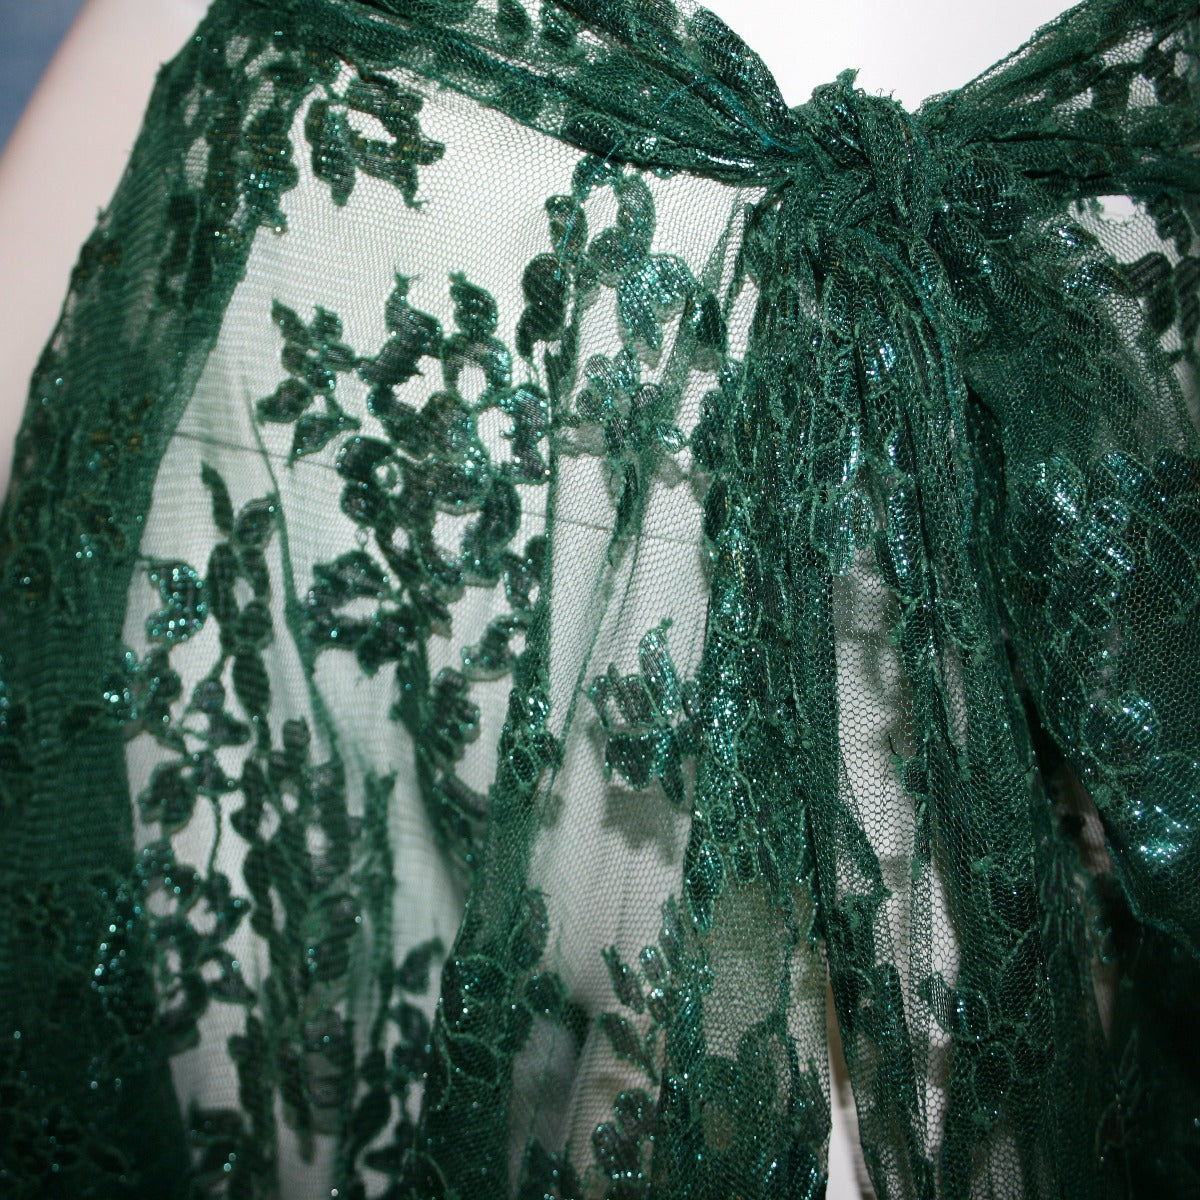 close view of Very full emerald green lace ballroom skirt, wrap style, was created with yards of deep emerald green metallic lace.